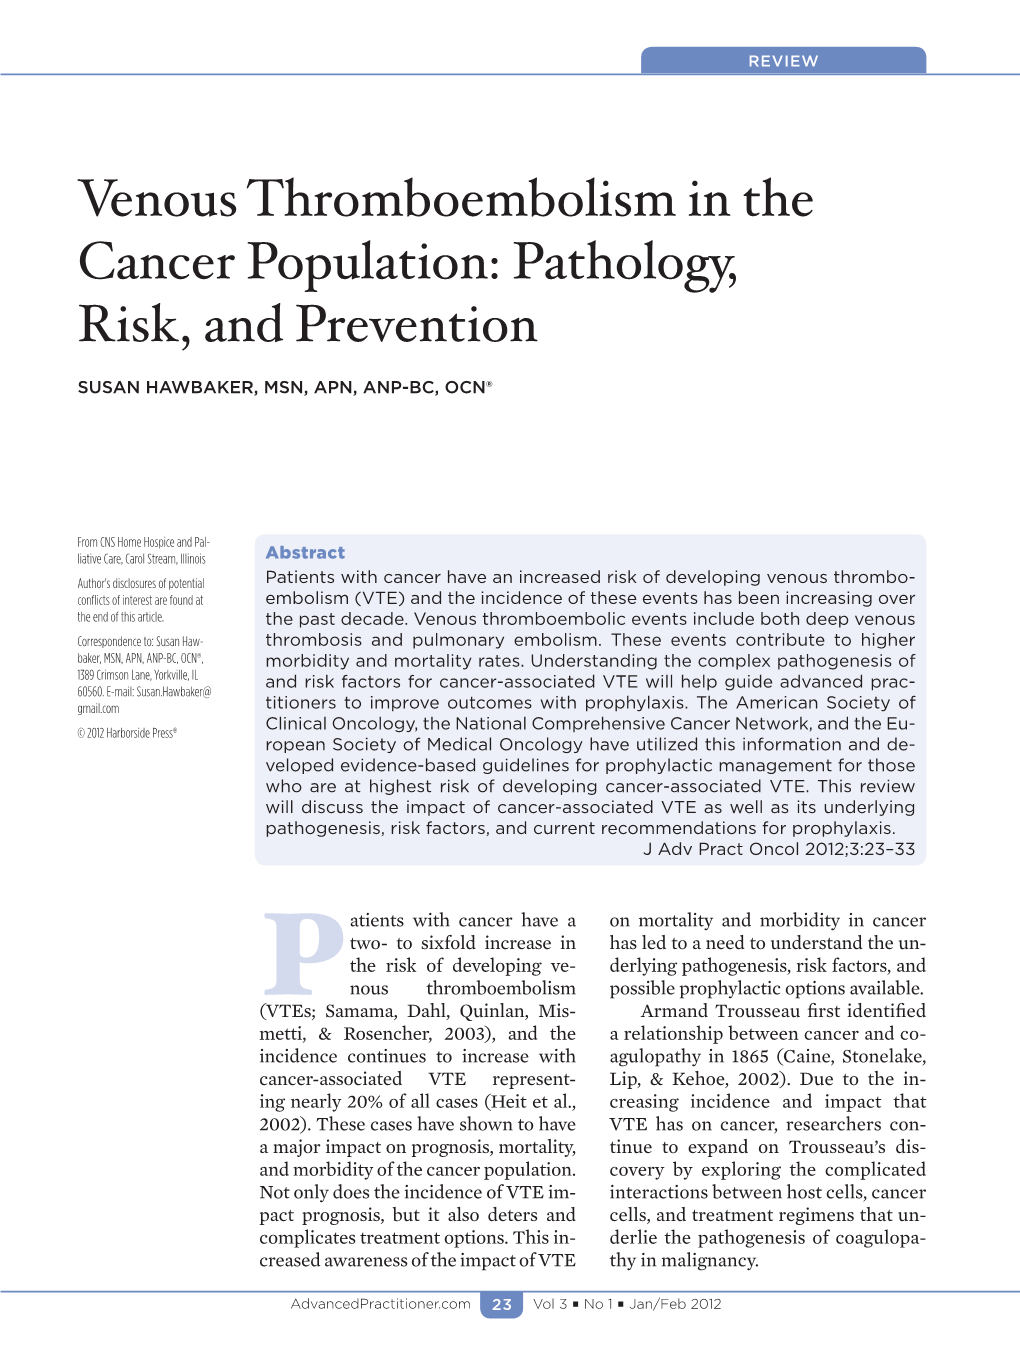 Venous Thromboembolism in the Cancer Population: Pathology, Risk, and Prevention